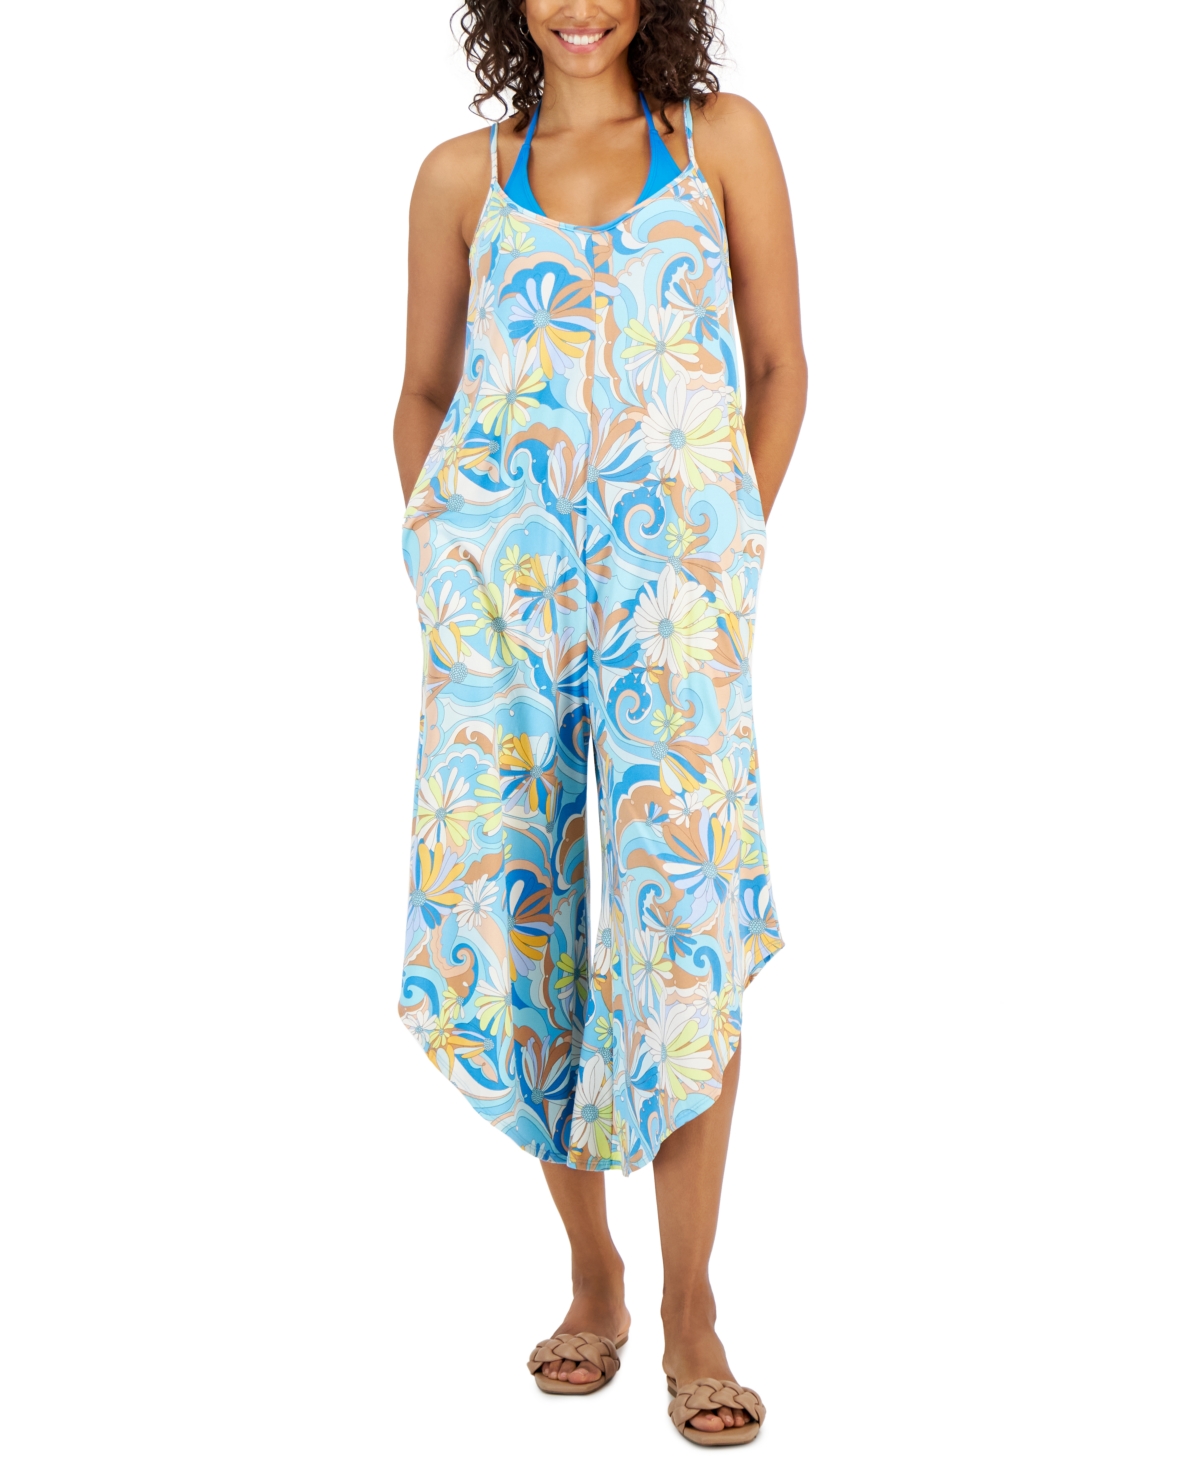 Women's Floral-Print Flowy Cover-Up Jumper - Blue Multi